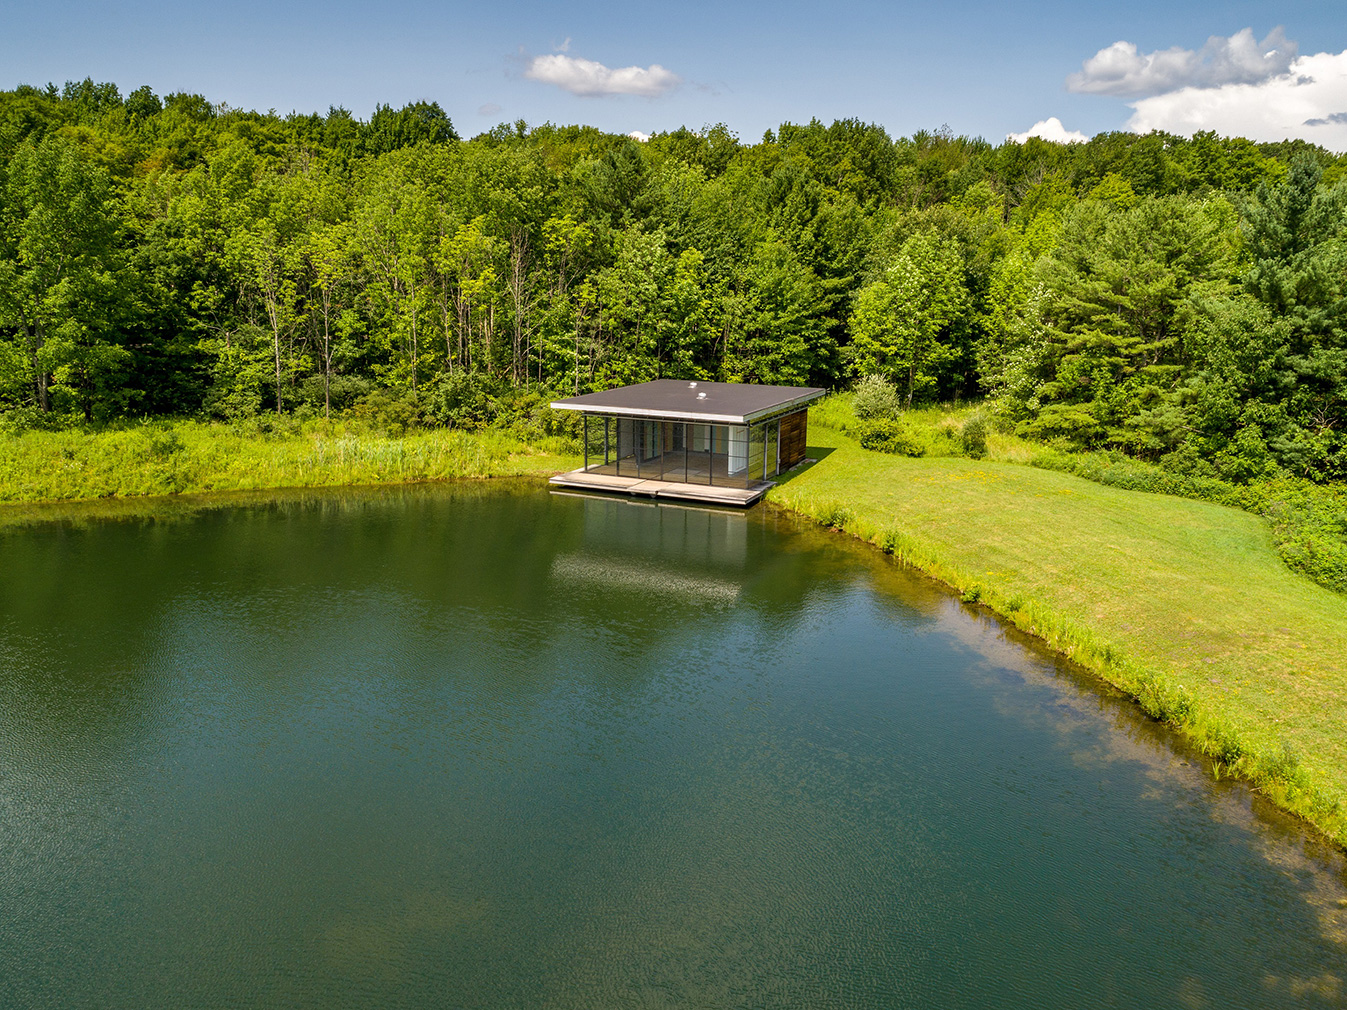 Steven Holl’s Y House is for sale in the Catskills